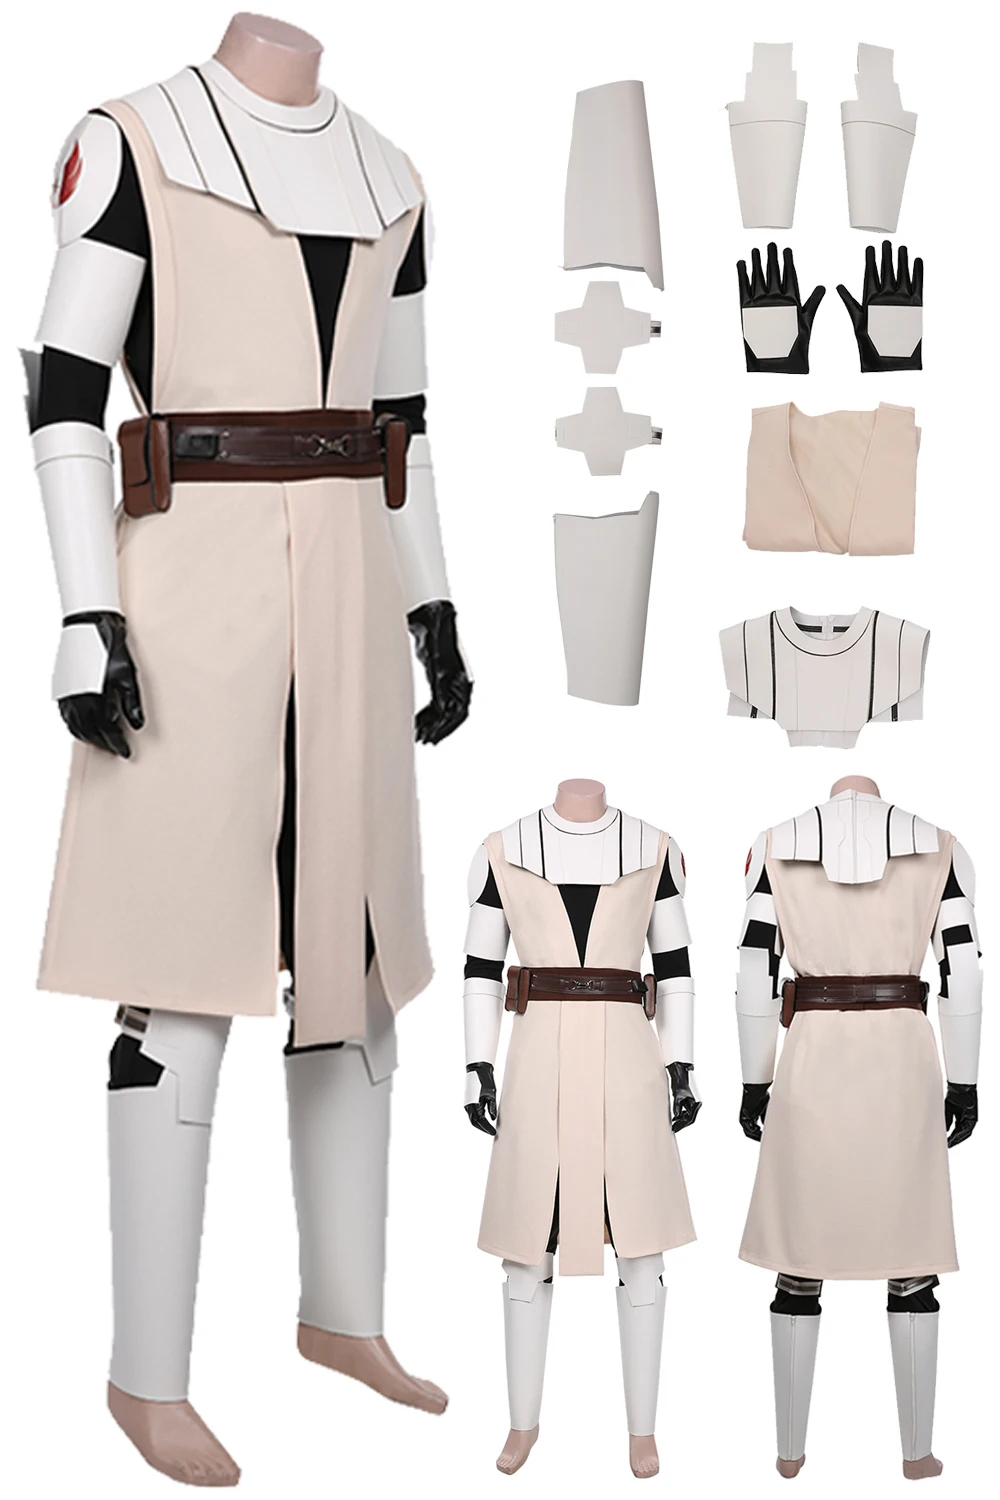 

Obi Wan Cosplay Kenobi Costume Uniform Movie Space Battle Disguise Outfits Adult Male Roleplay Halloween Carnival Fantasy Suit